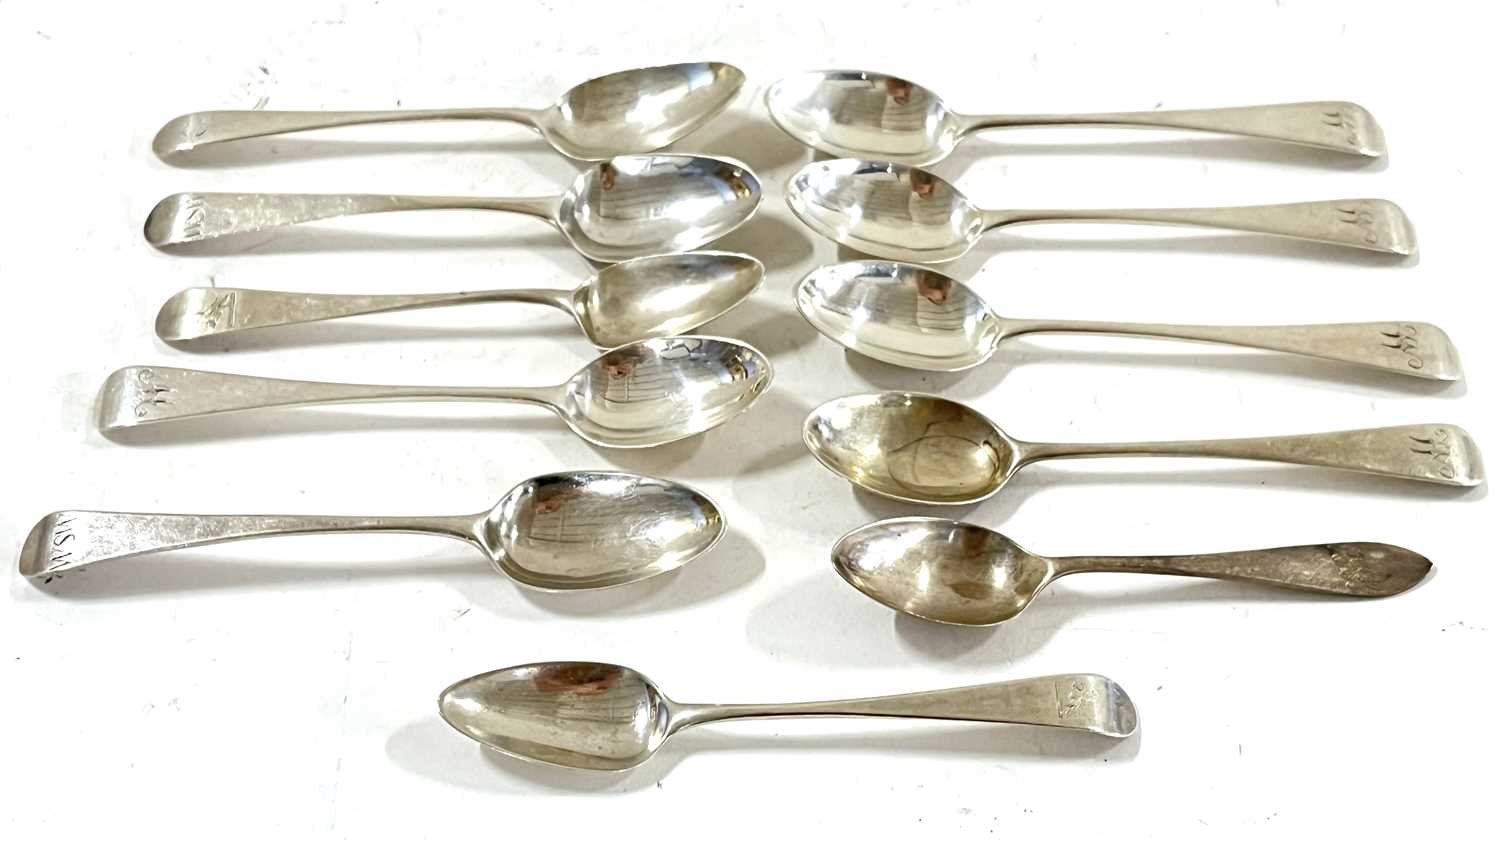 Five Victorian Old English pattern teaspoons, initialled London 1890, Charles Boyton, five - Image 5 of 8